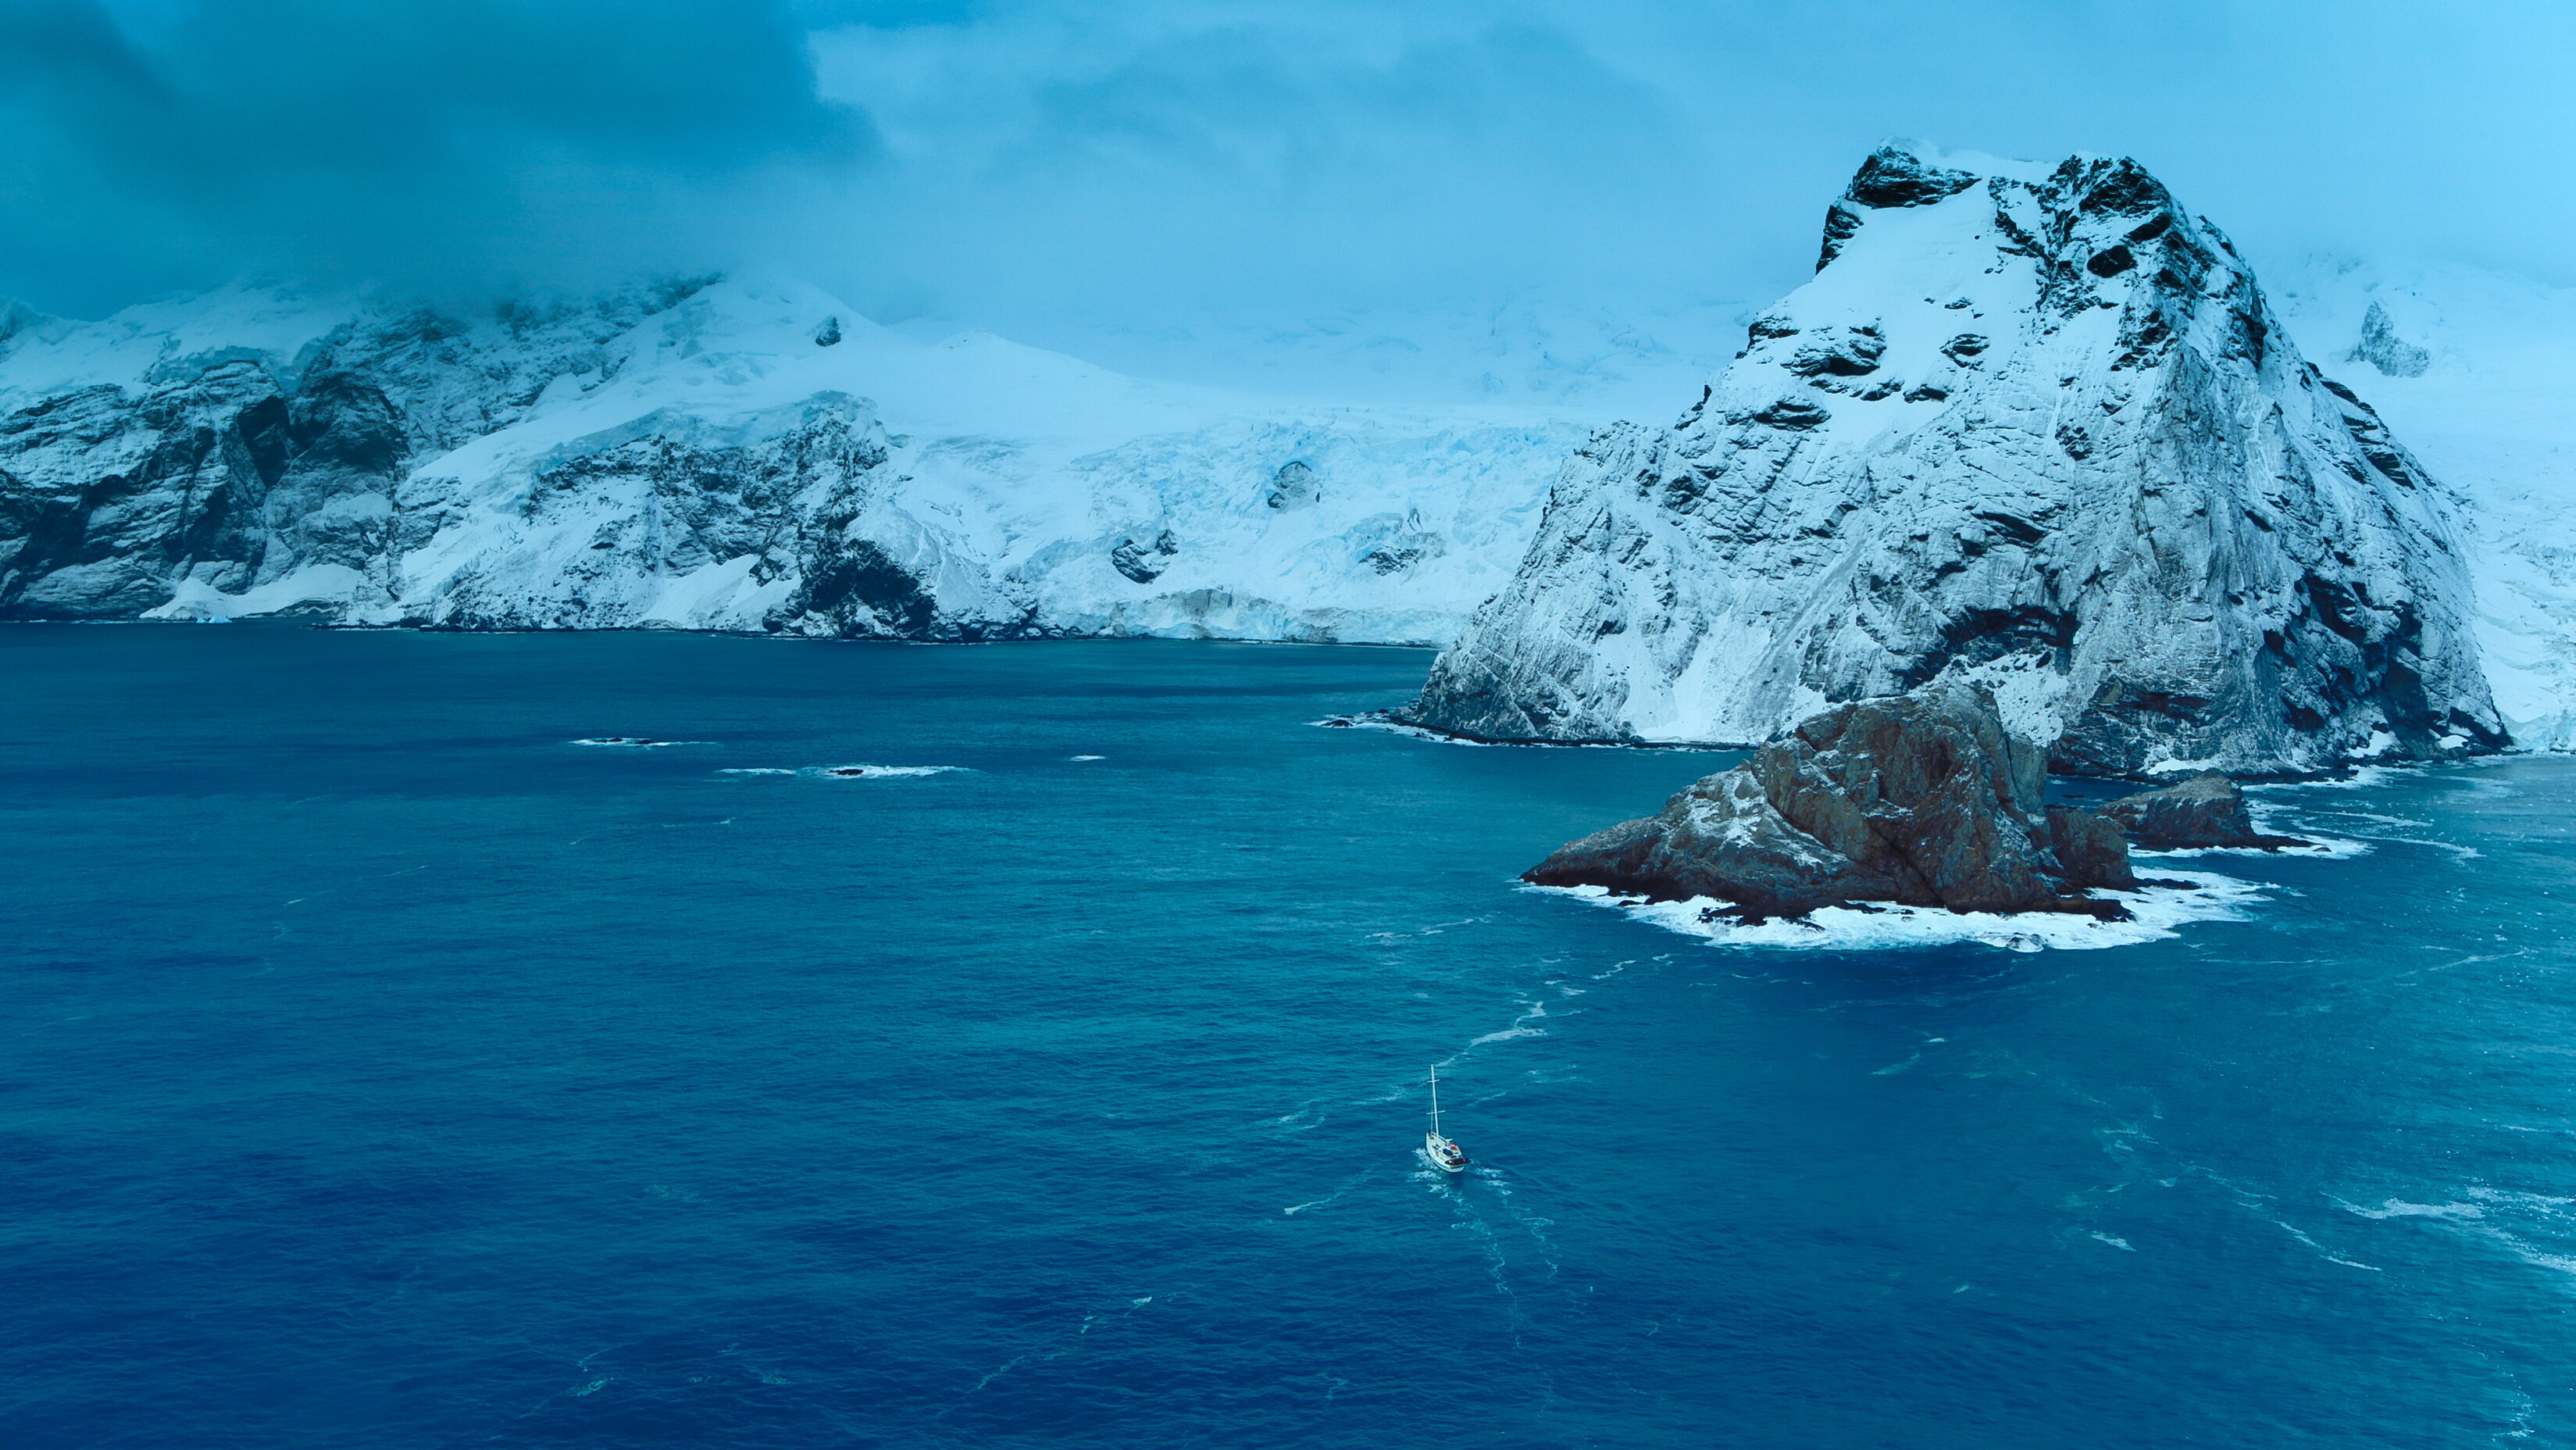 The crew seeks refuge from the brutal Antarctic weather behind Elephant island. (Credit: National Geographic/Bertie Gregory for Disney+)